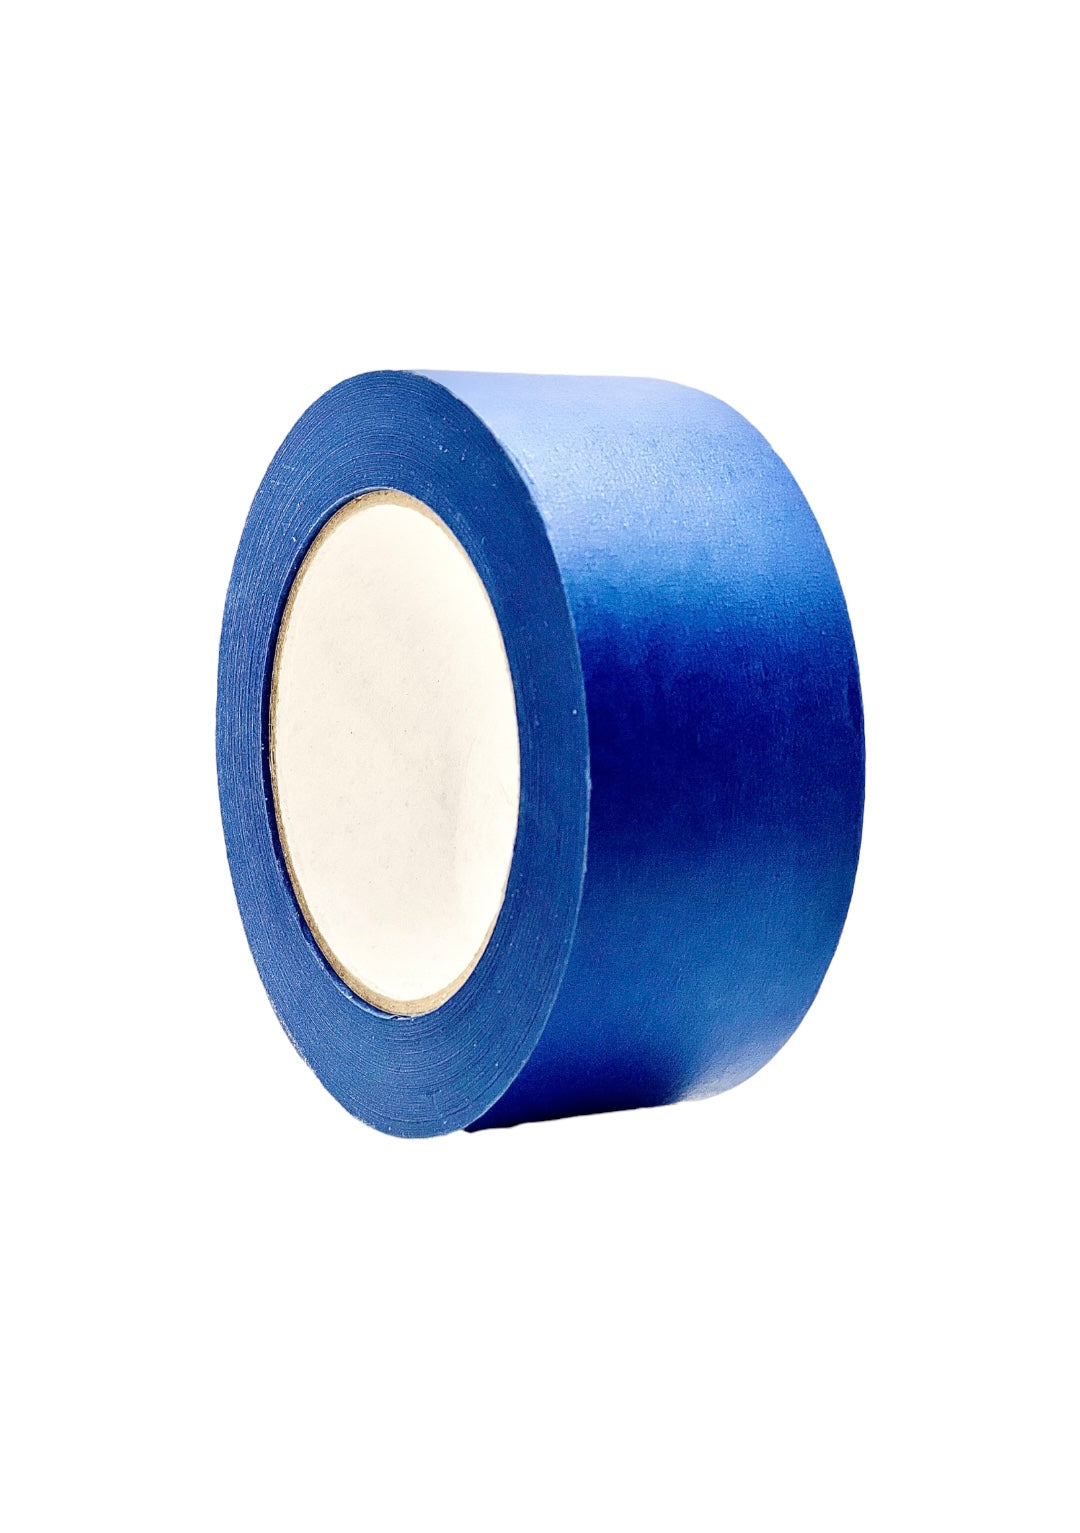 A Wide Range of Wholesale masking tape dispenser for Your Greenhouse 